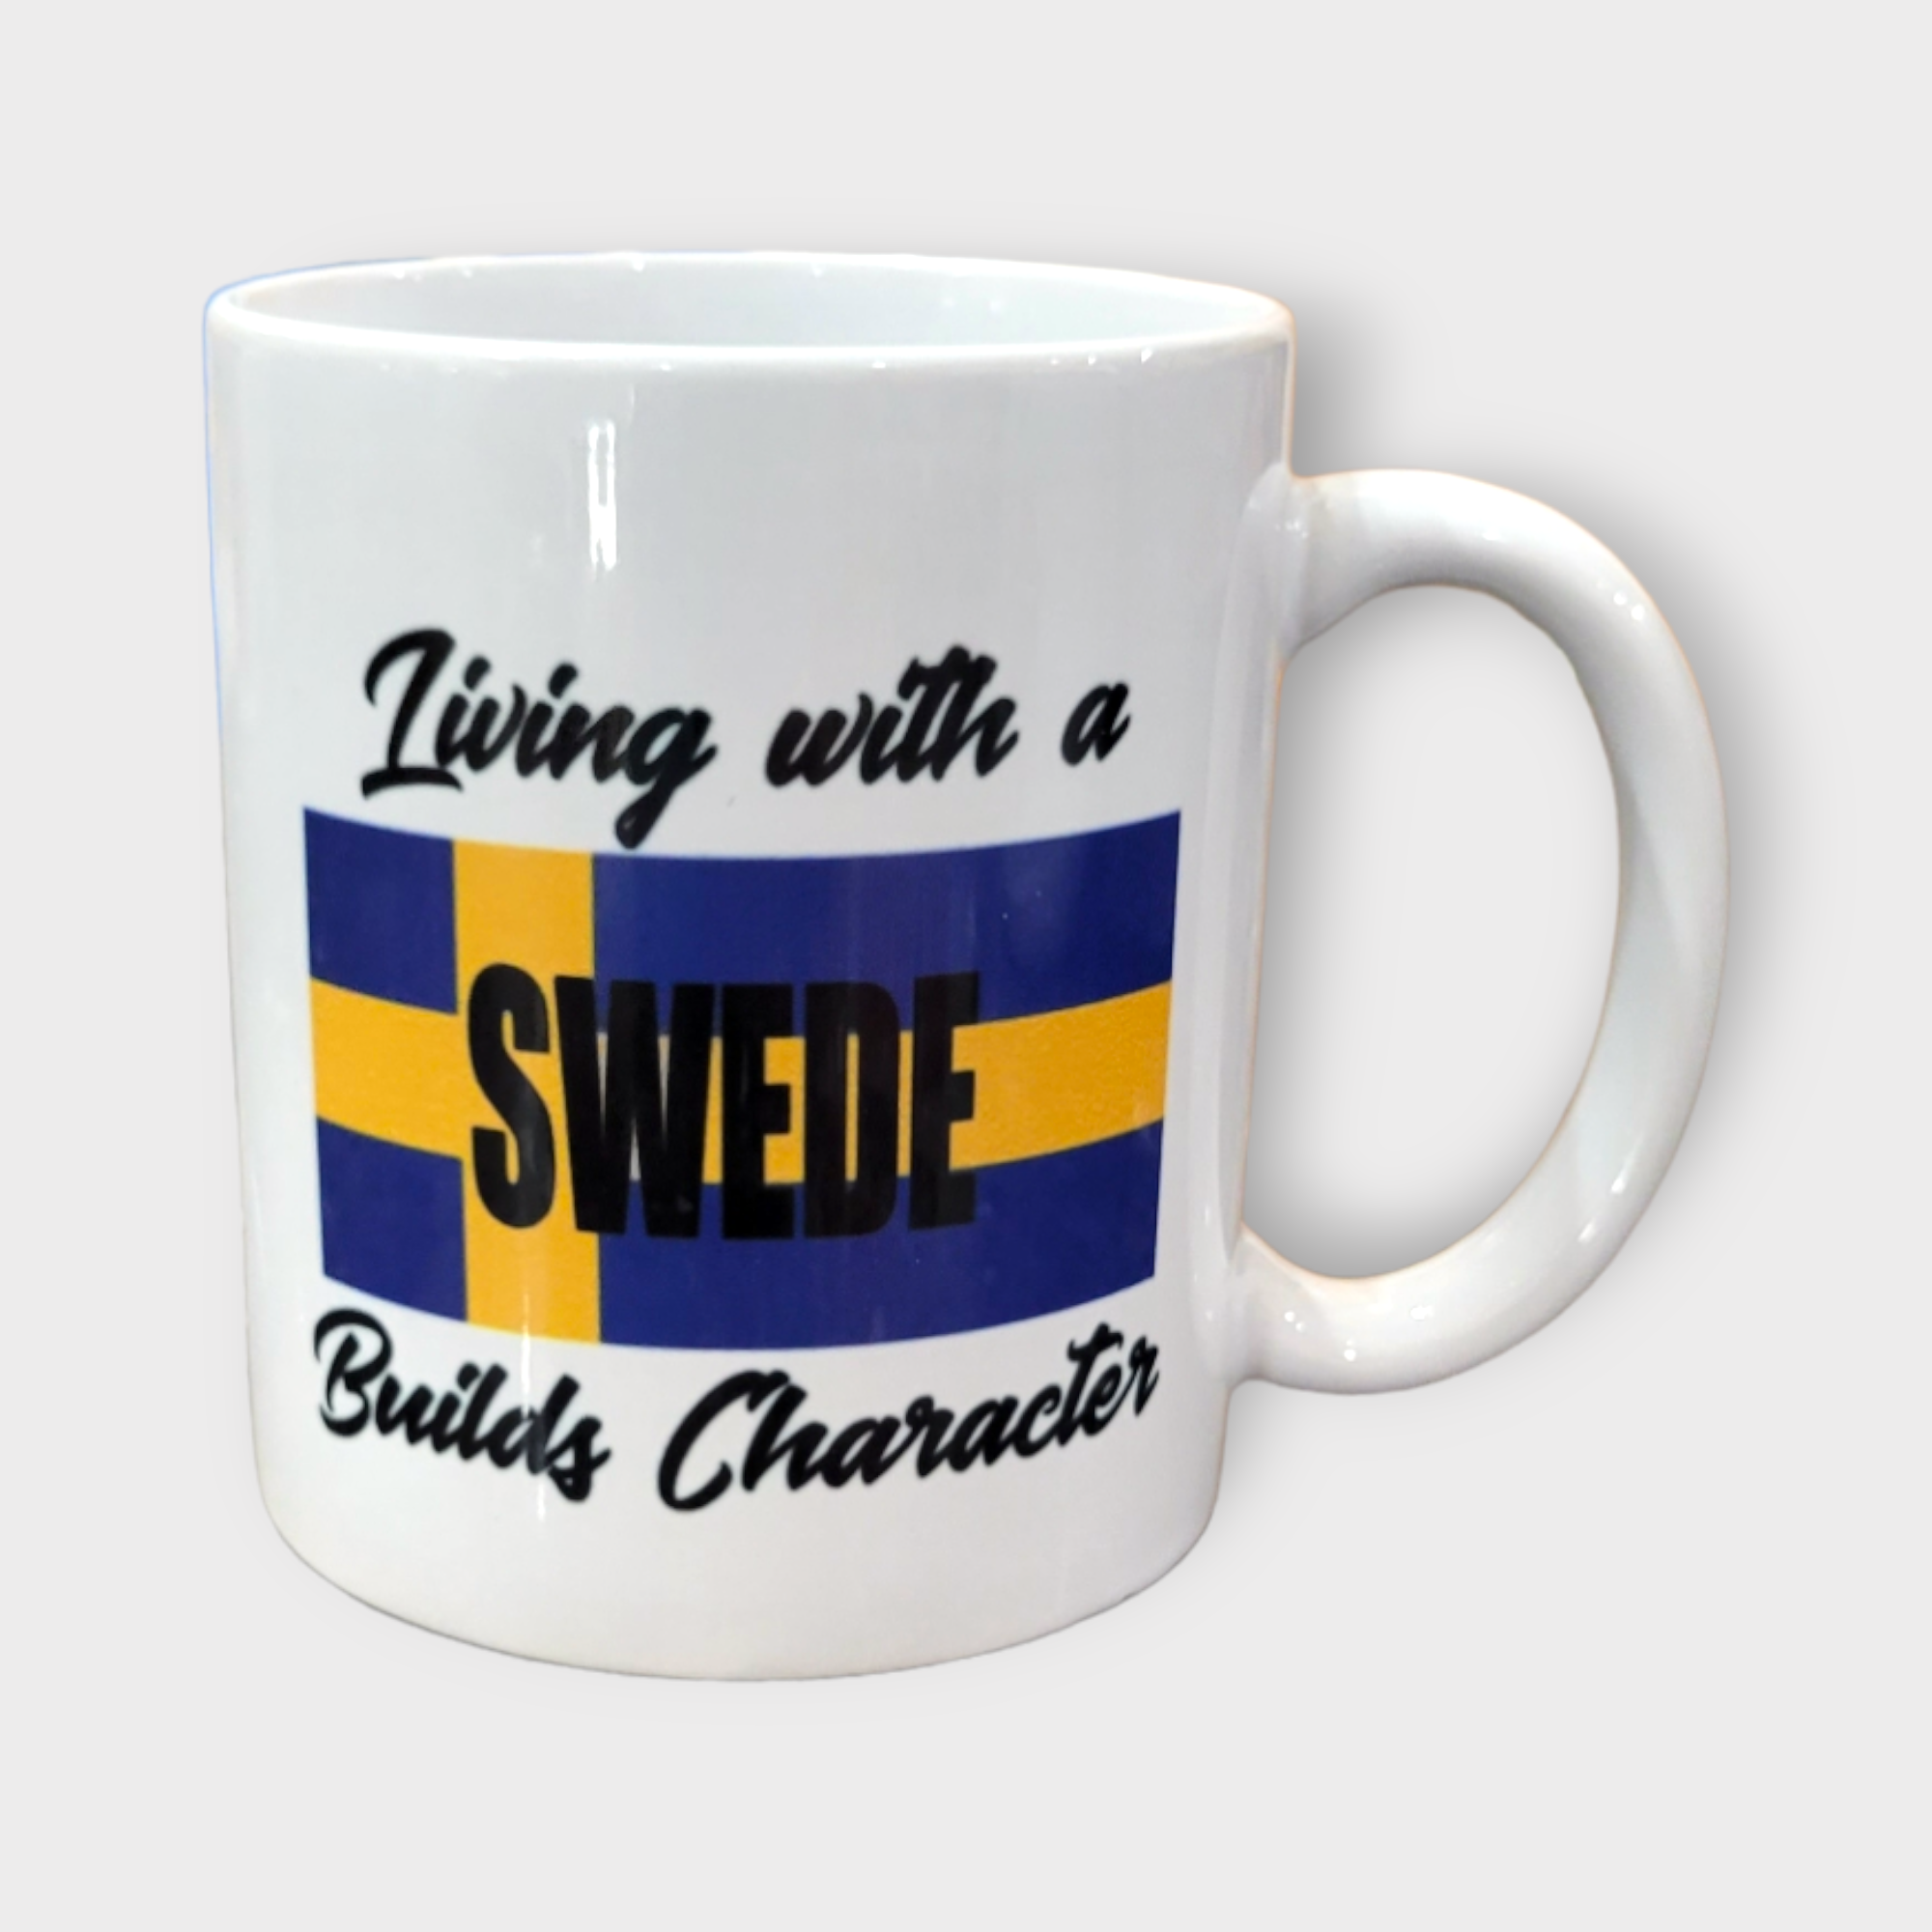 Mug: Living with a Swede builds Character